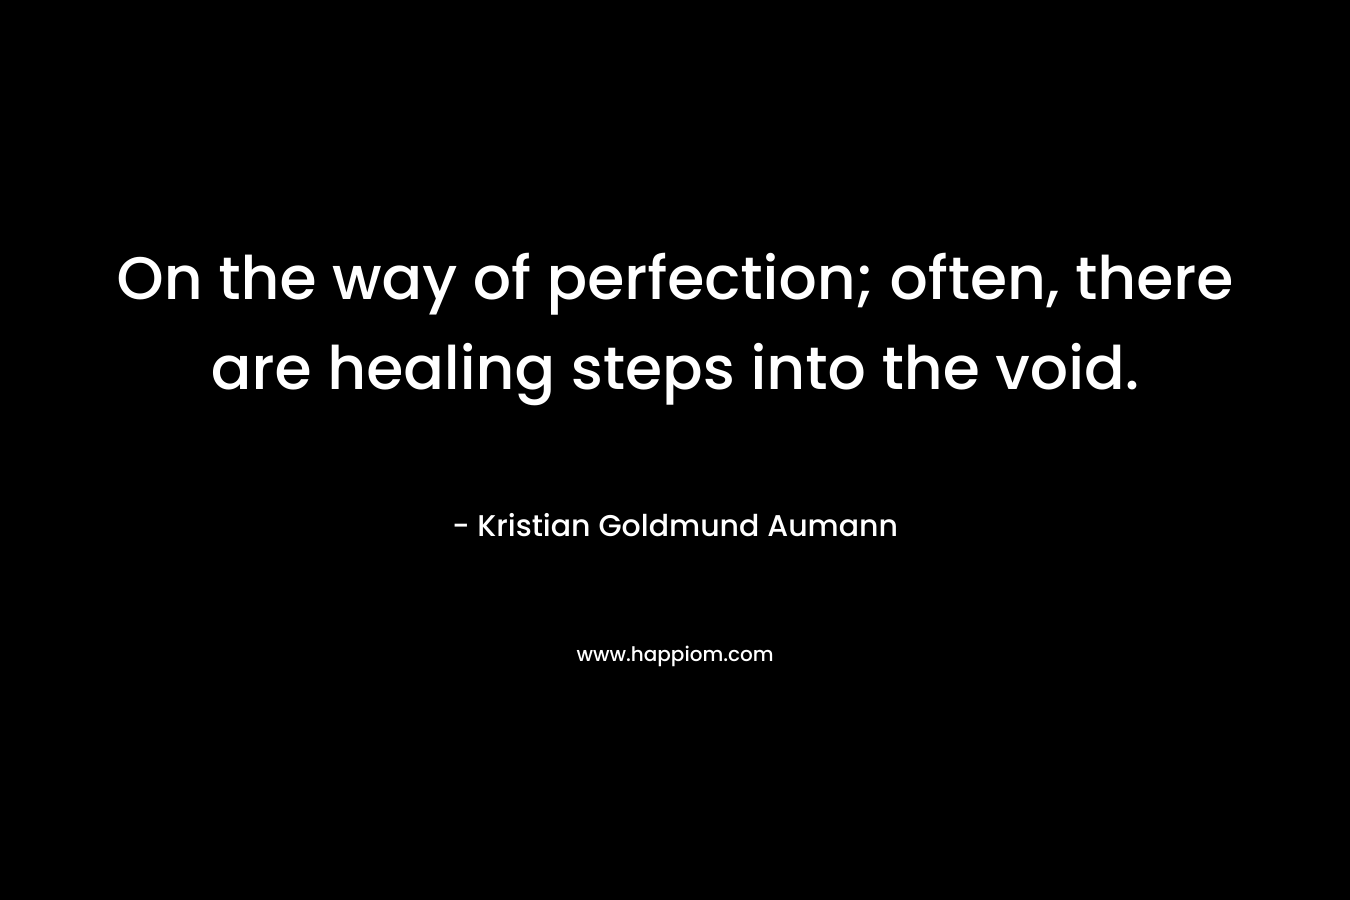 On the way of perfection; often, there are healing steps into the void. – Kristian Goldmund Aumann